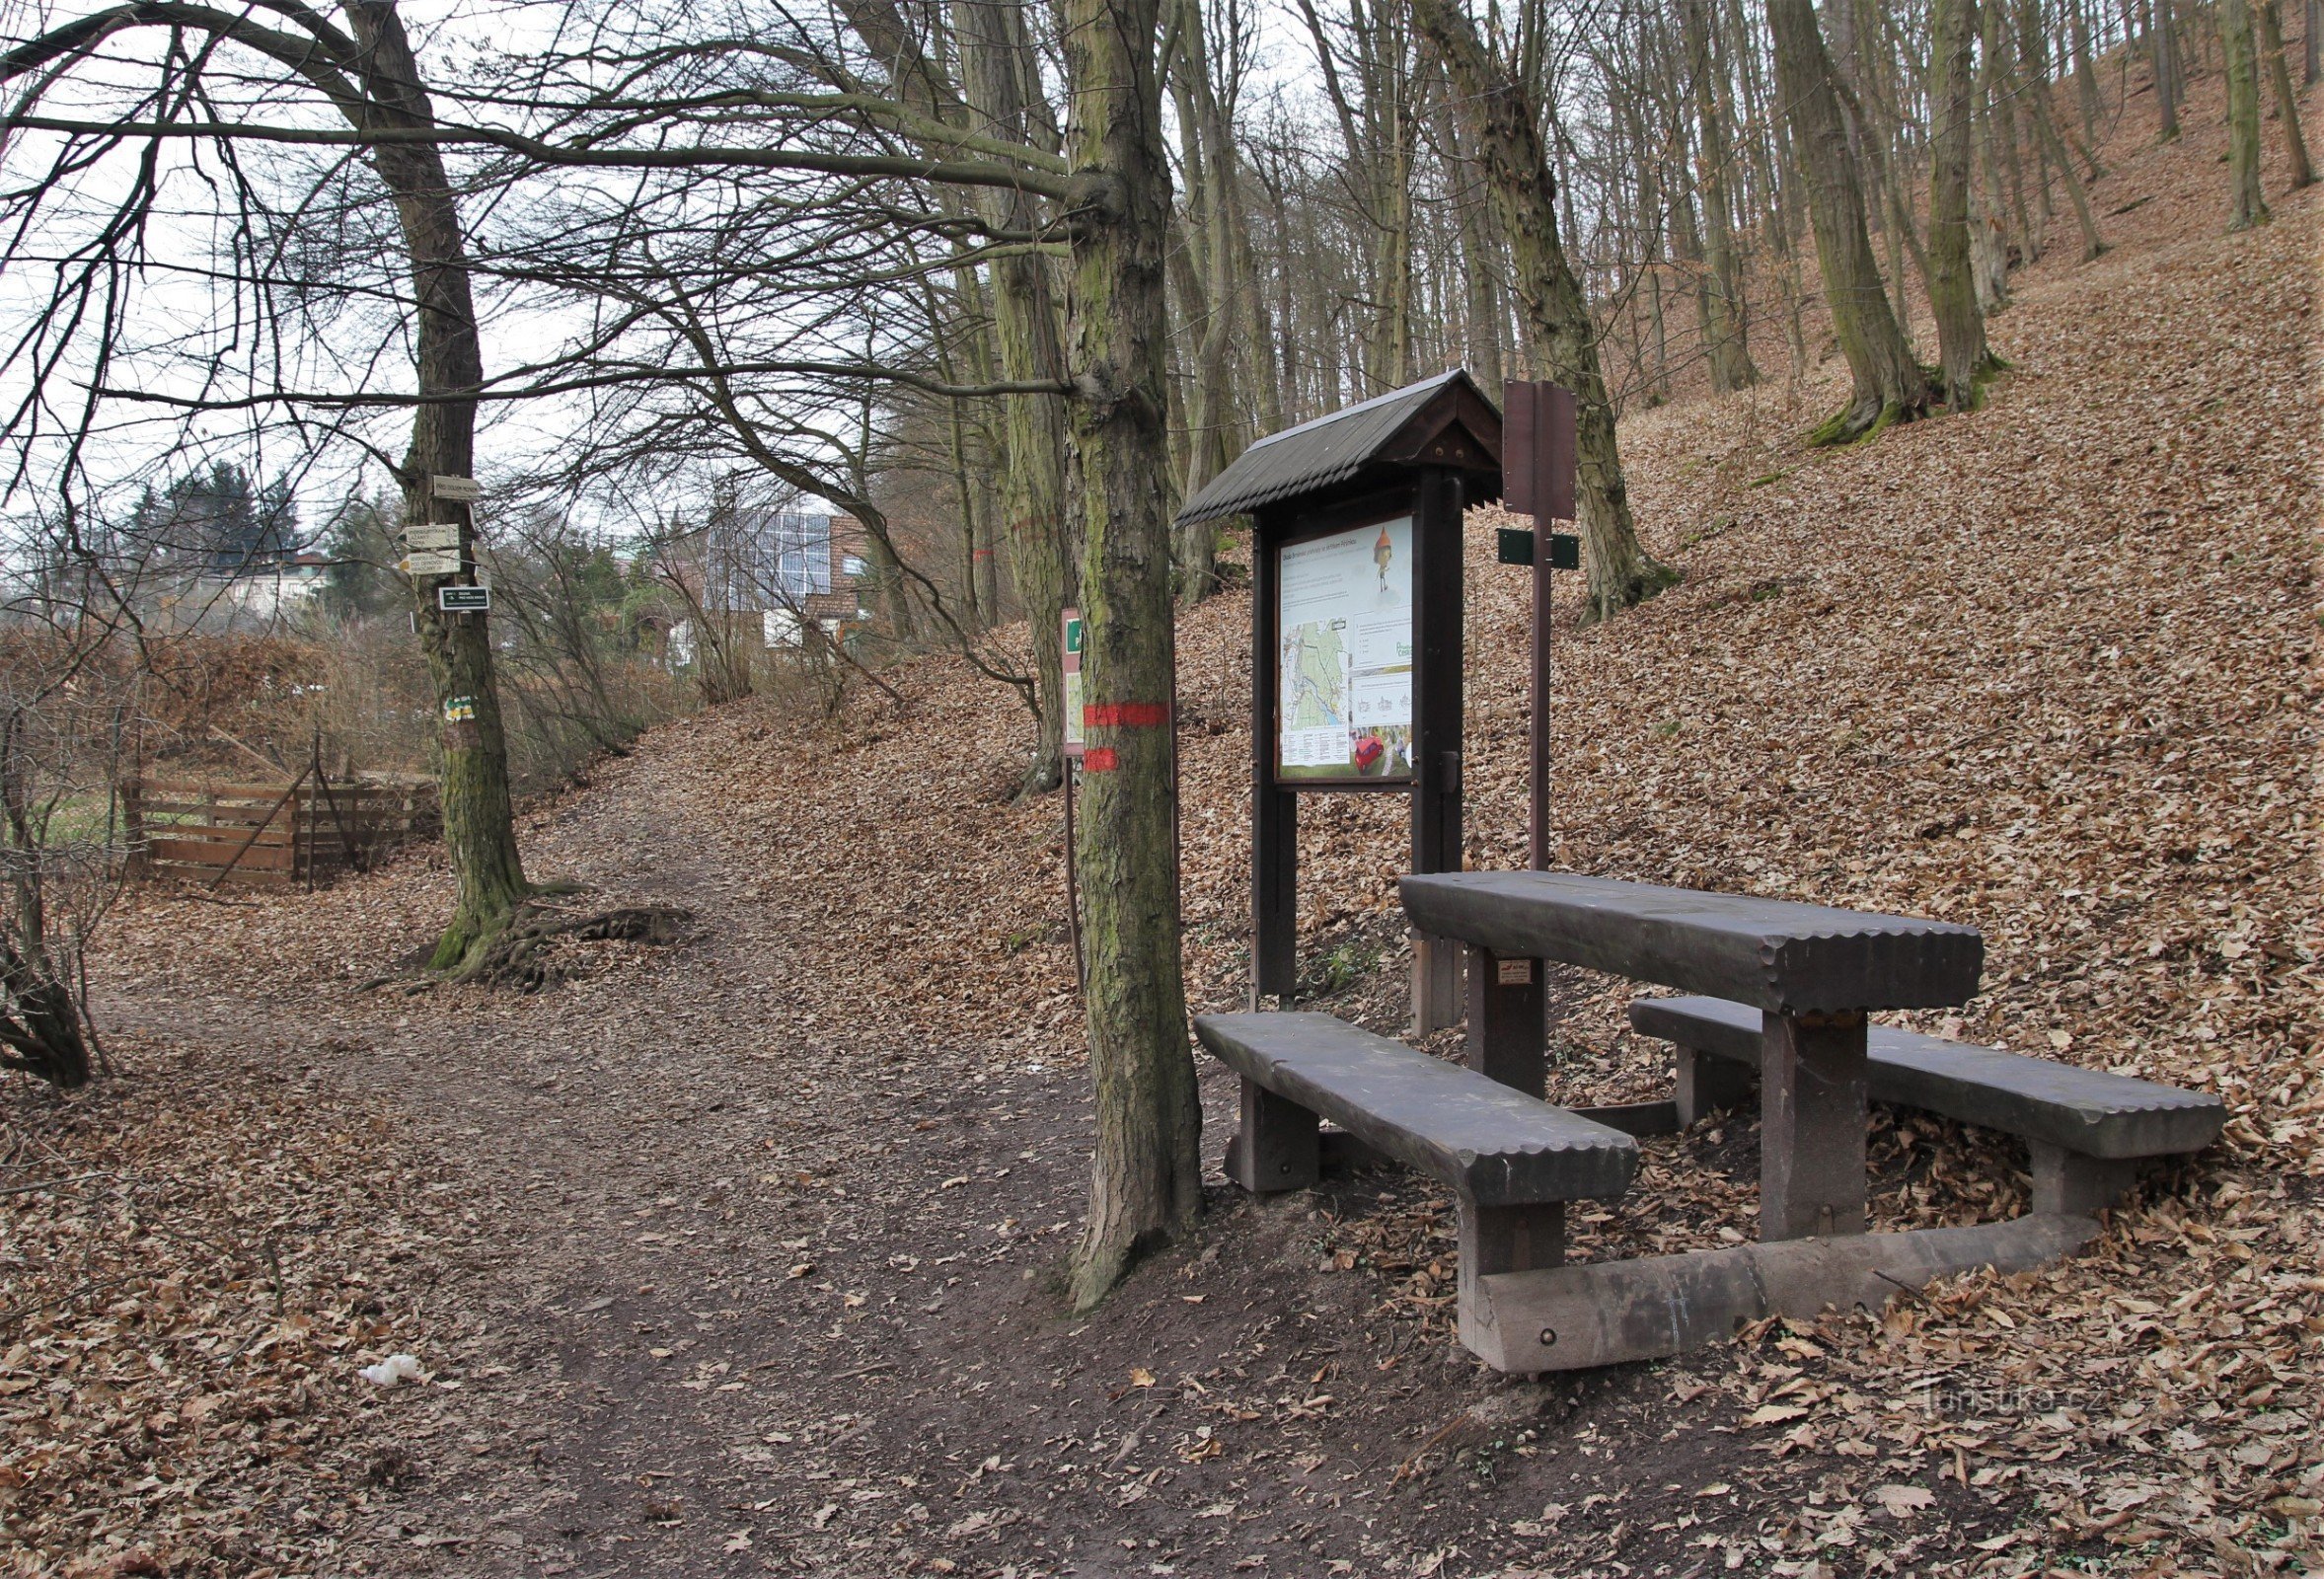 Benches with a reservation information board